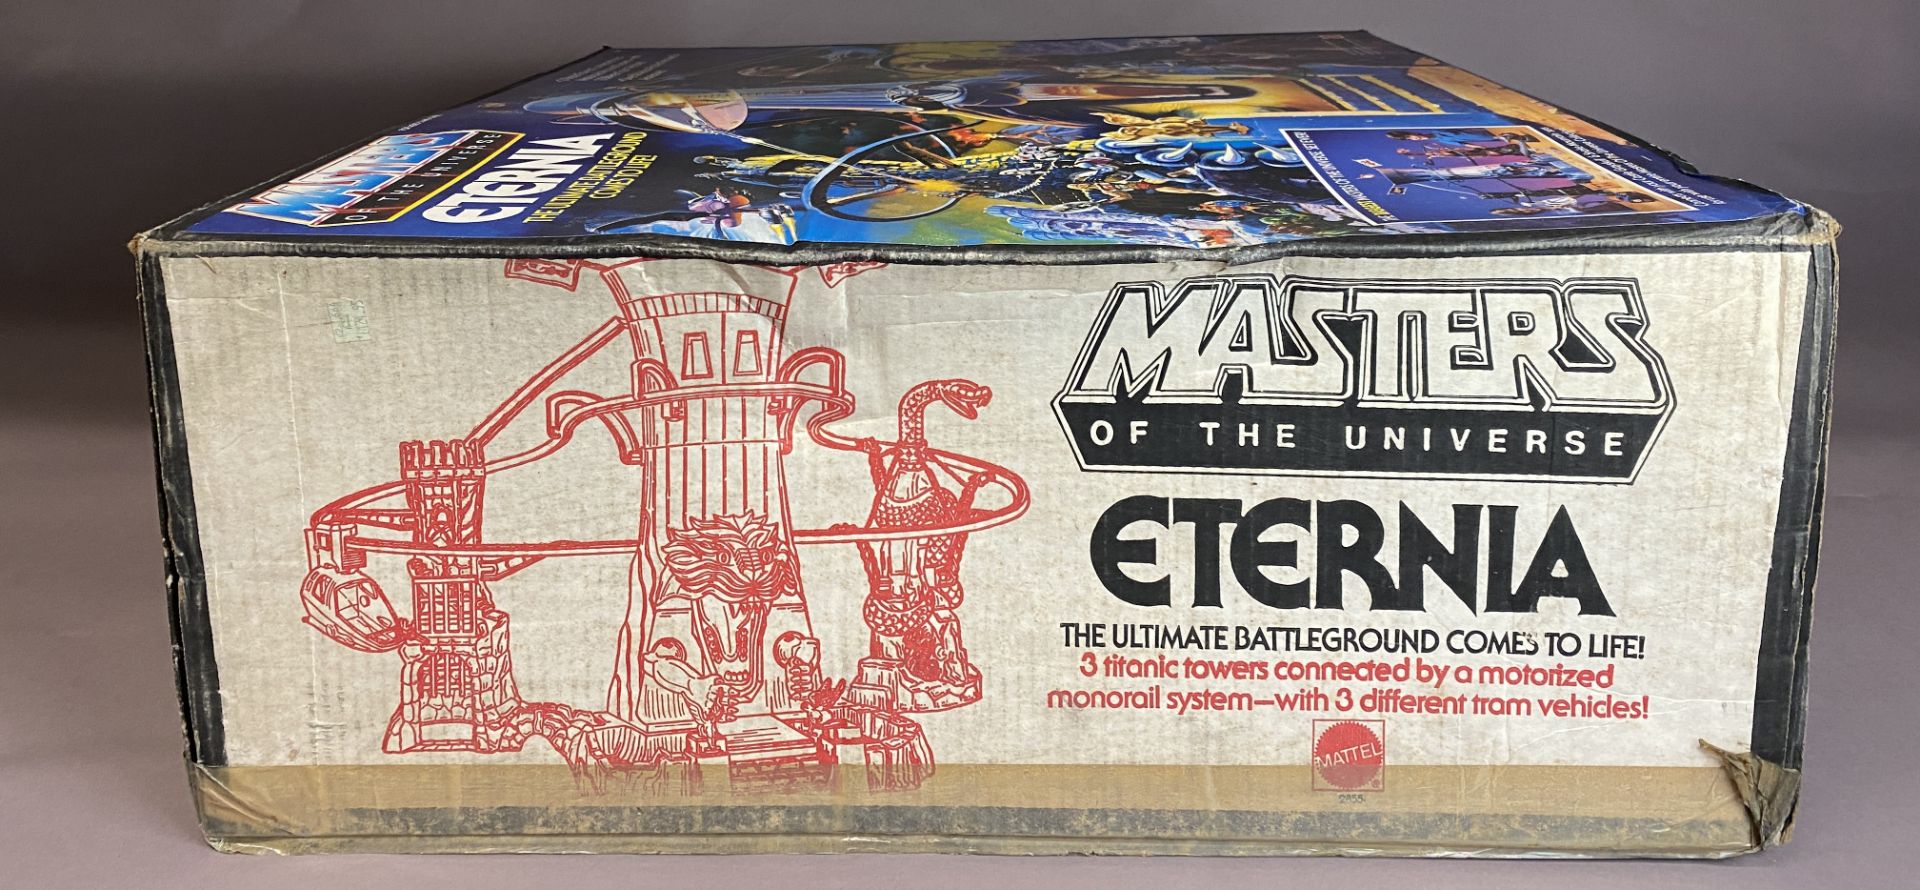 ETERNIA - Vintage Masters of the Universe Playset and Original Box (MOTU) - Appears to be complete - Image 99 of 125